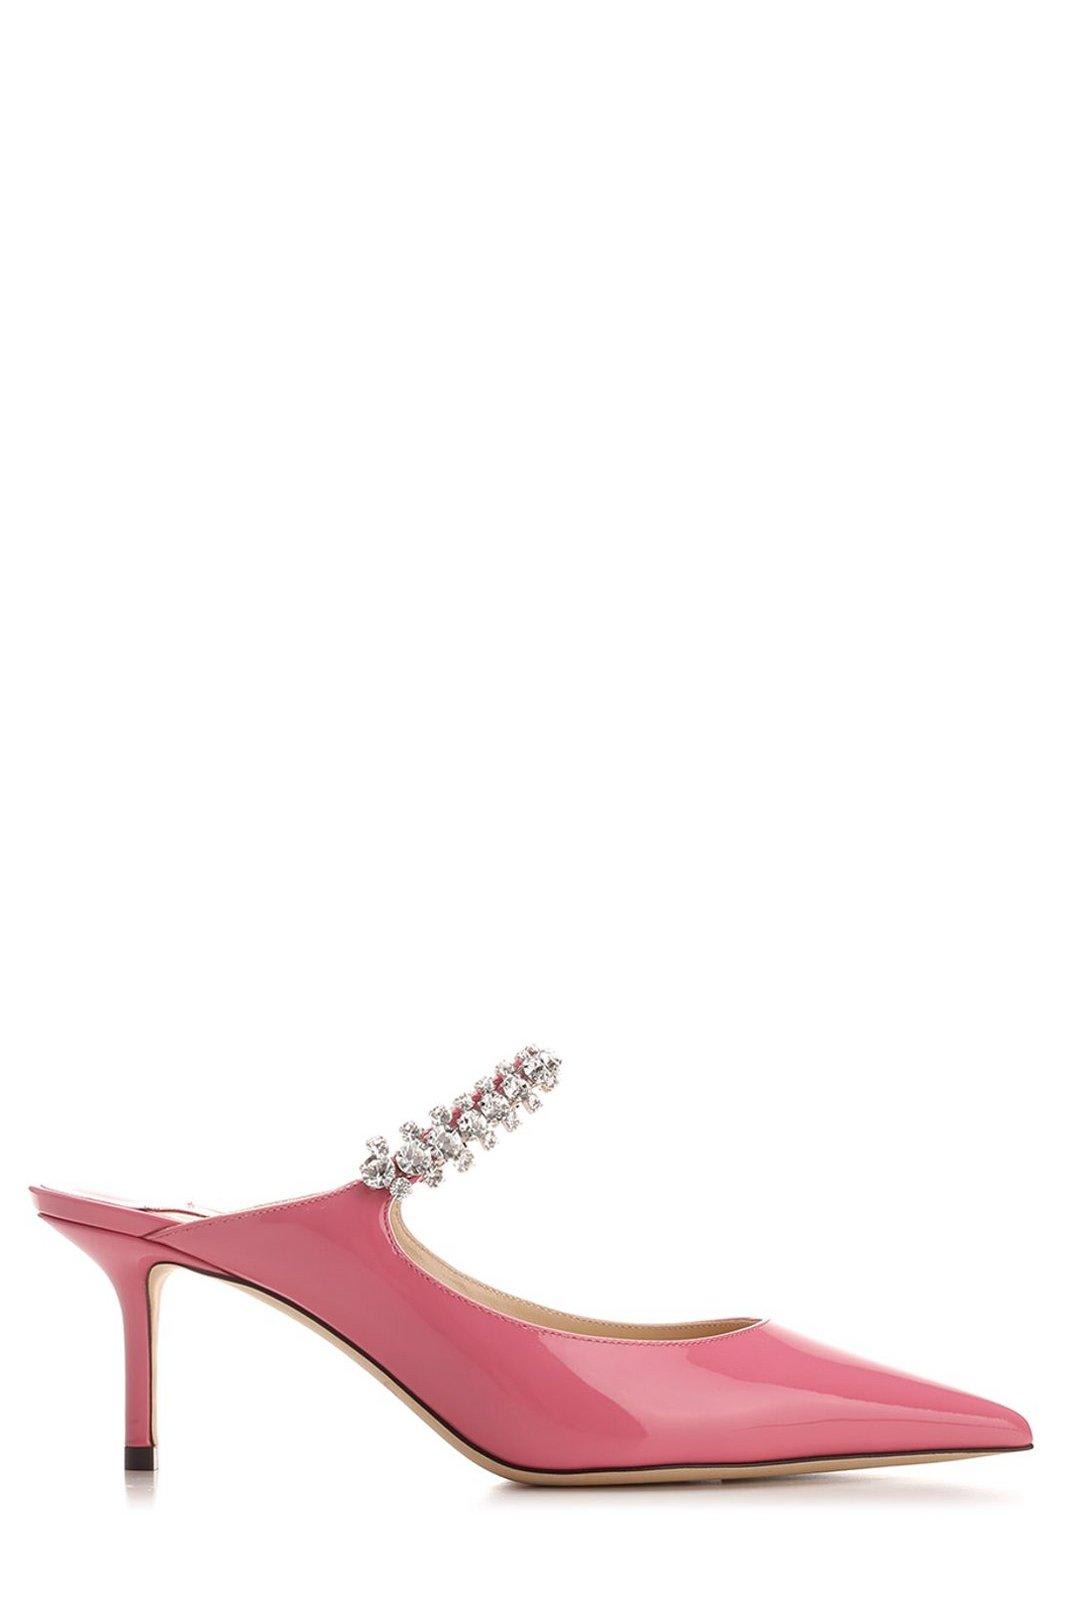 Bing 65 Pointed Toe Pumps